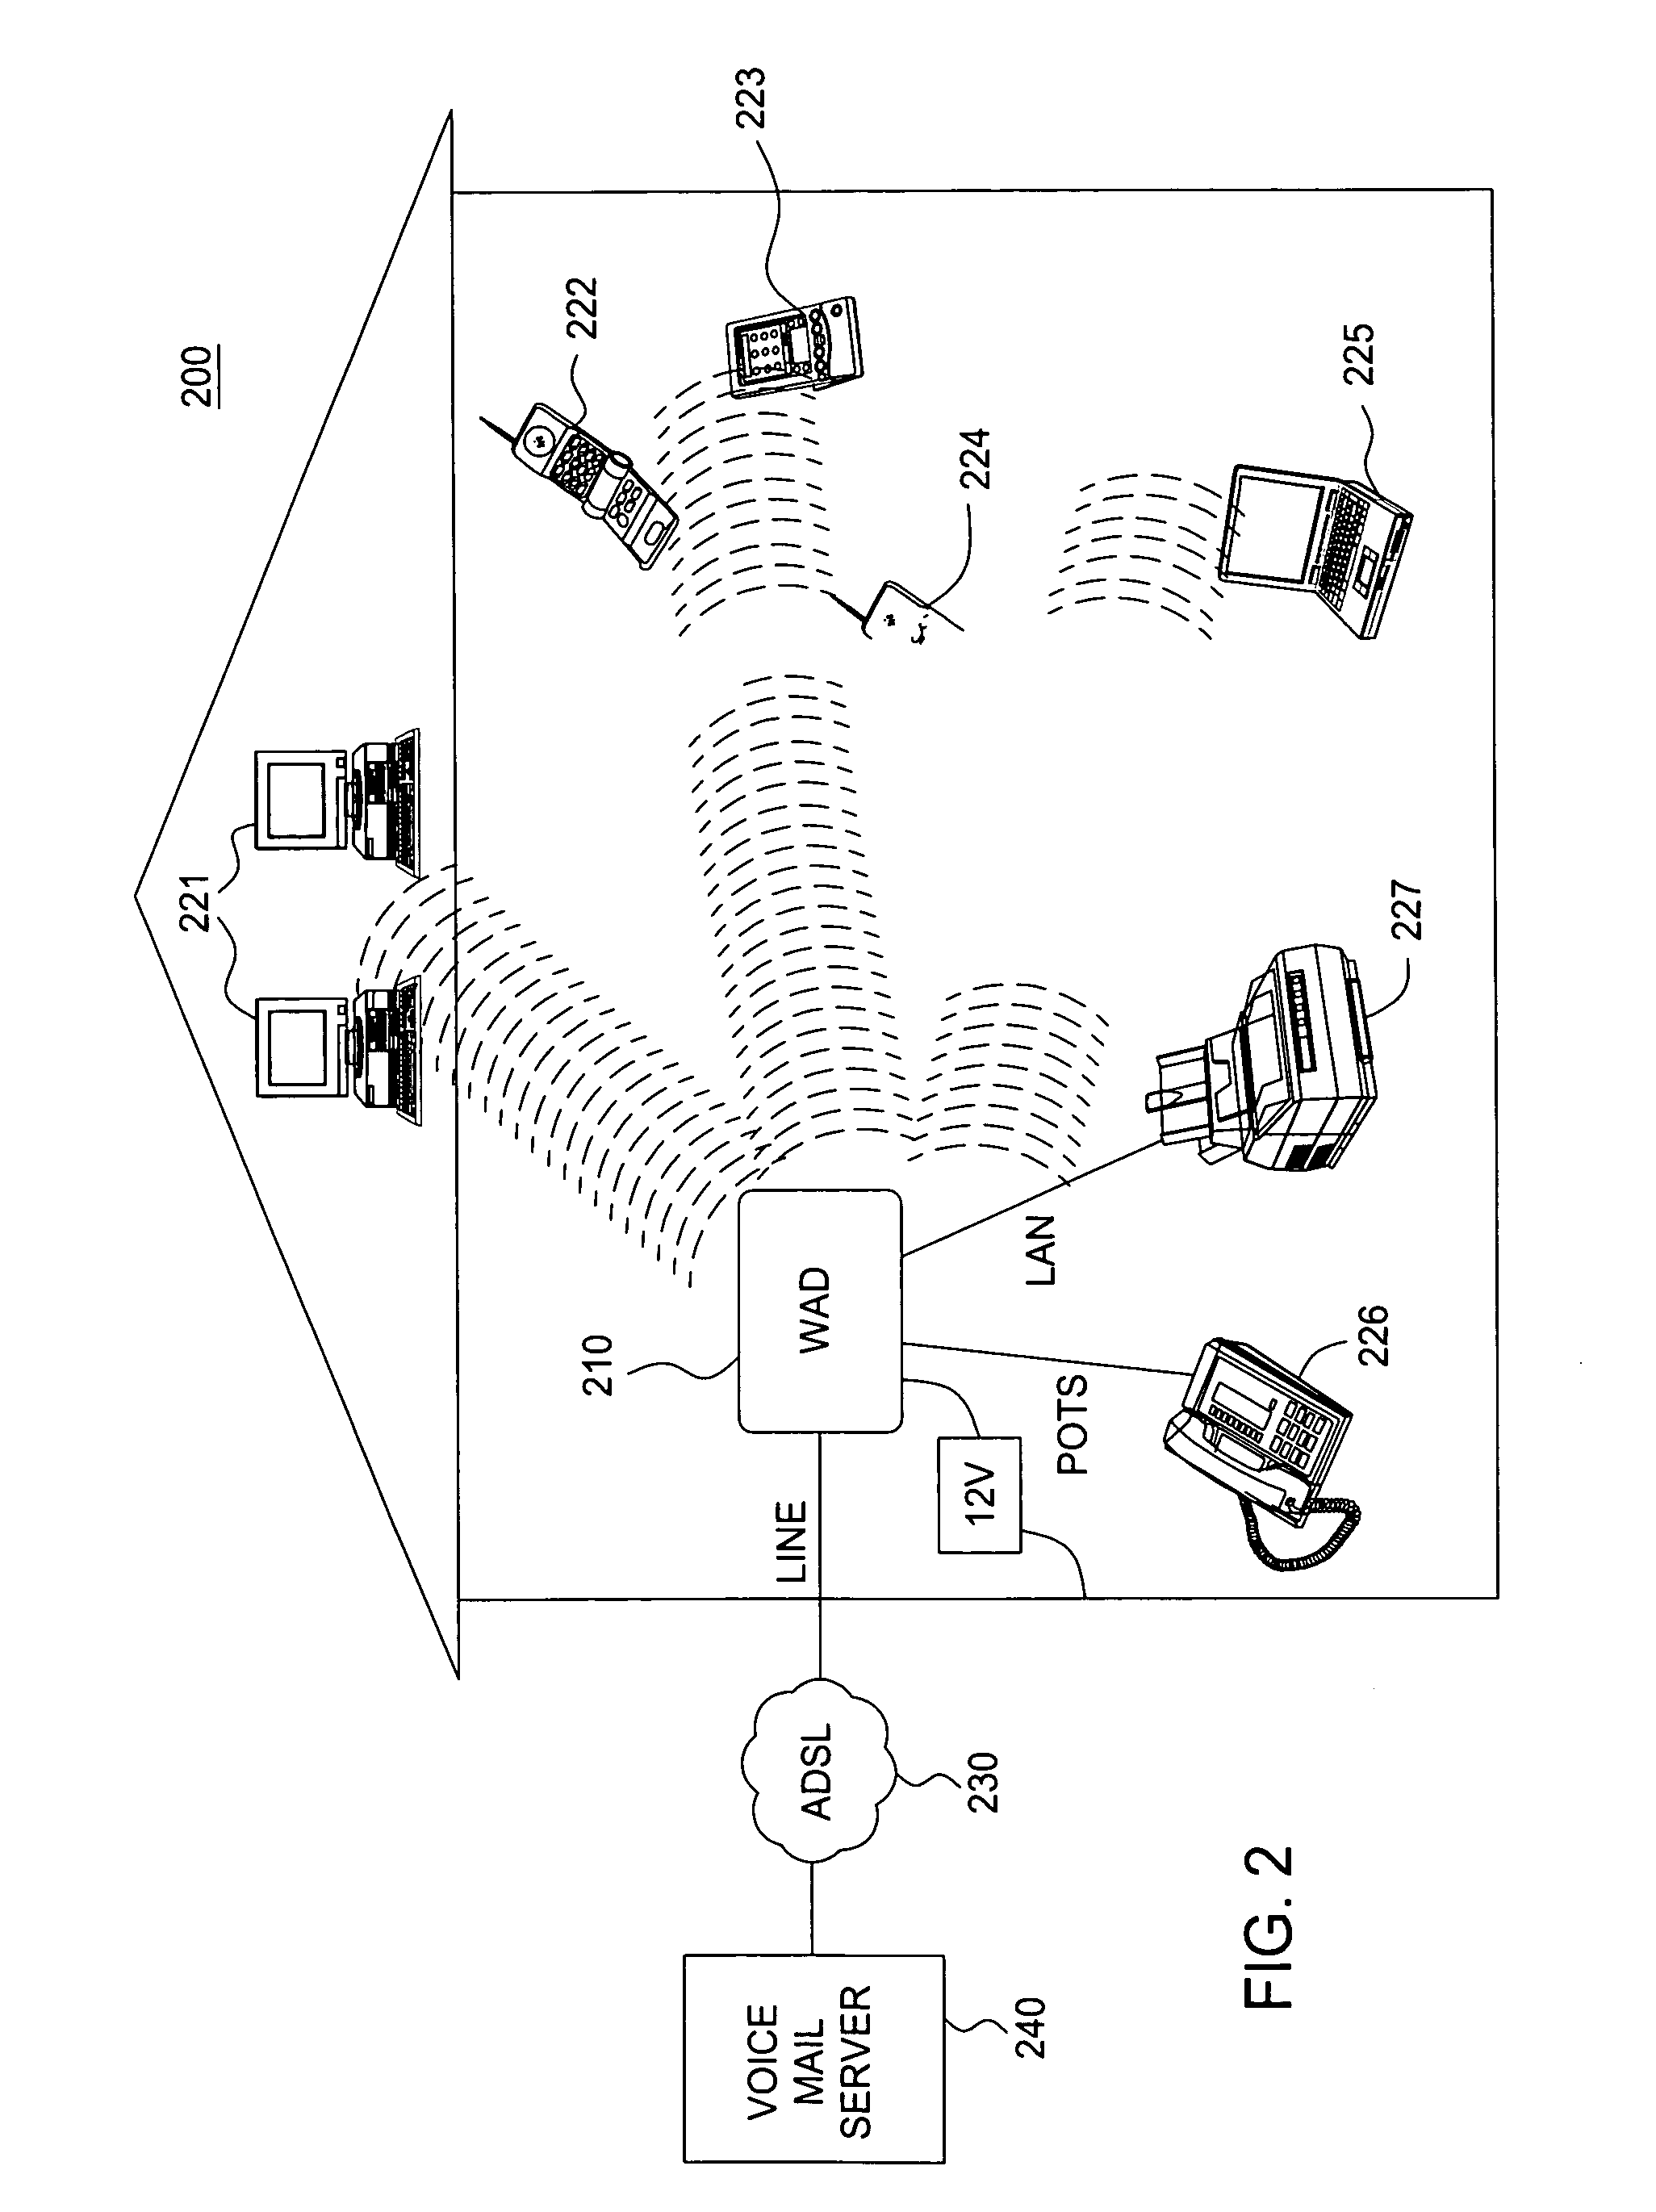 Method and apparatus for providing a voicemail notification